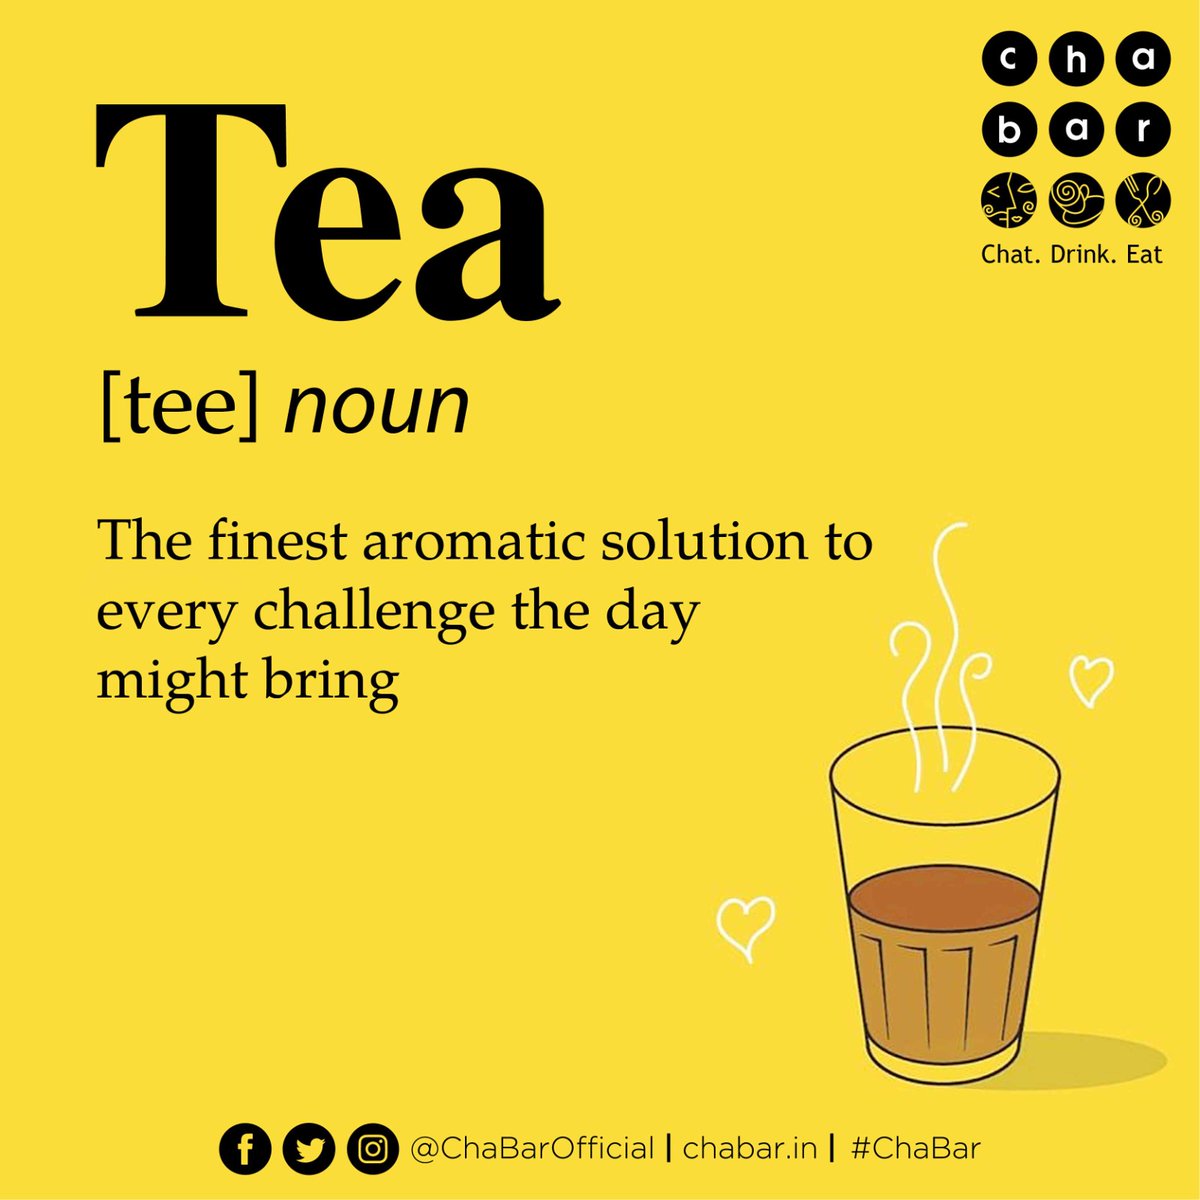 When tea is there, everything is going to be all right. ☕️😌🍵😊🫖😃

#TeaFixesAll #TeaTherapy #TeaBringsBalance #ChaBar